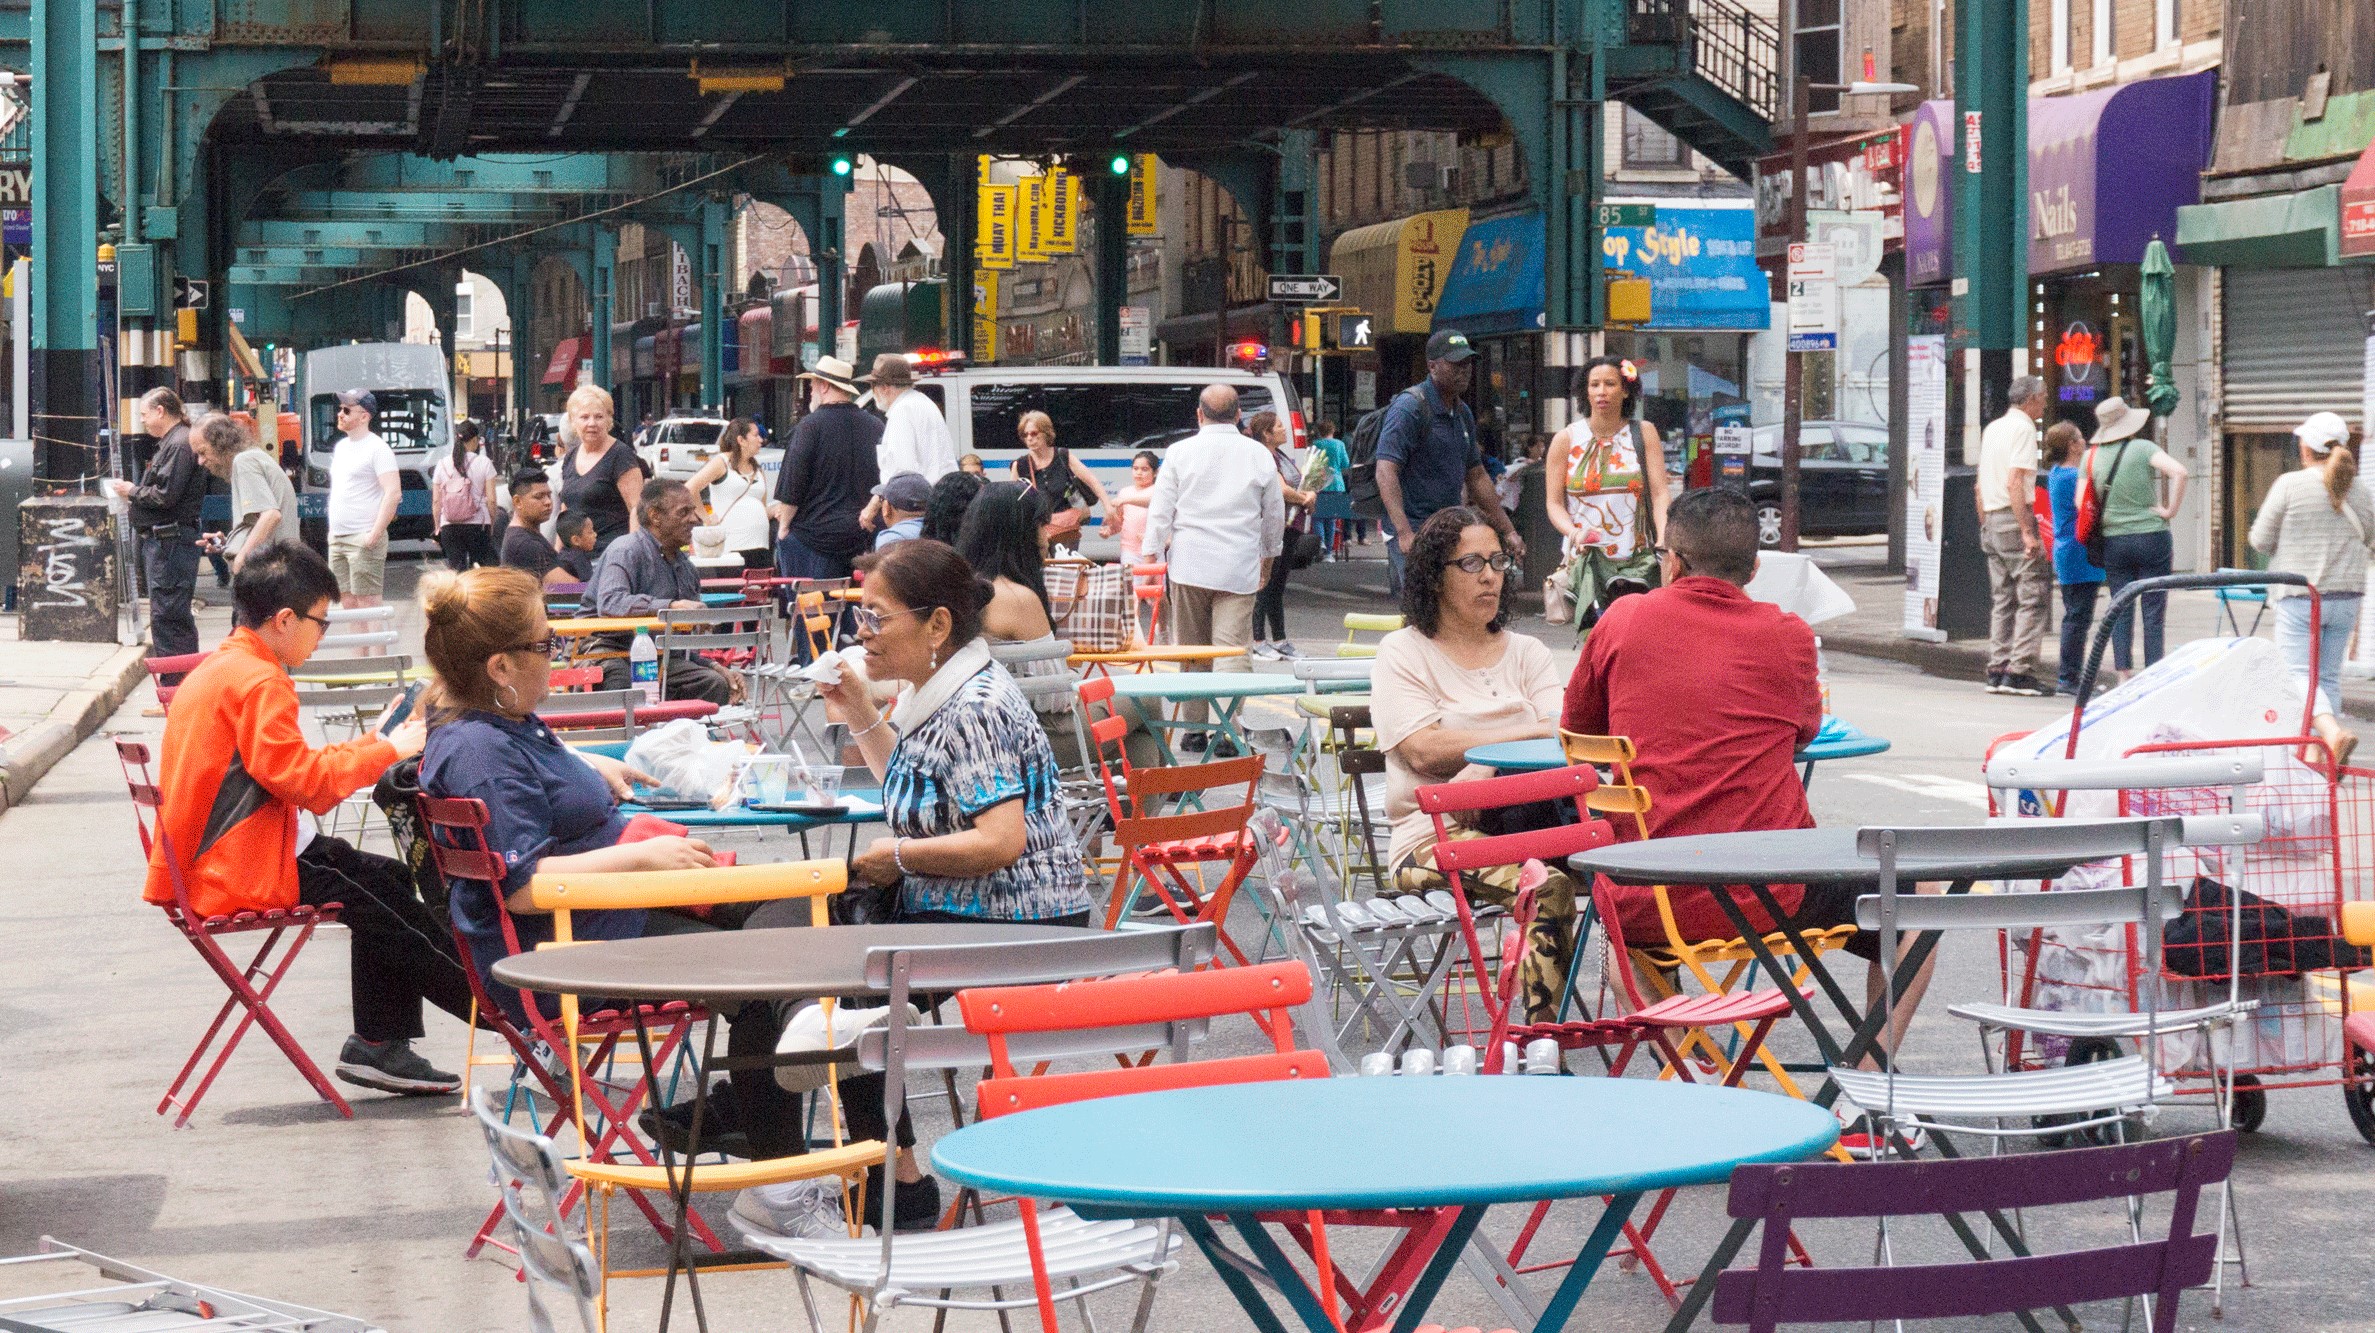 street scene with people seated at community tables under an elevated train track